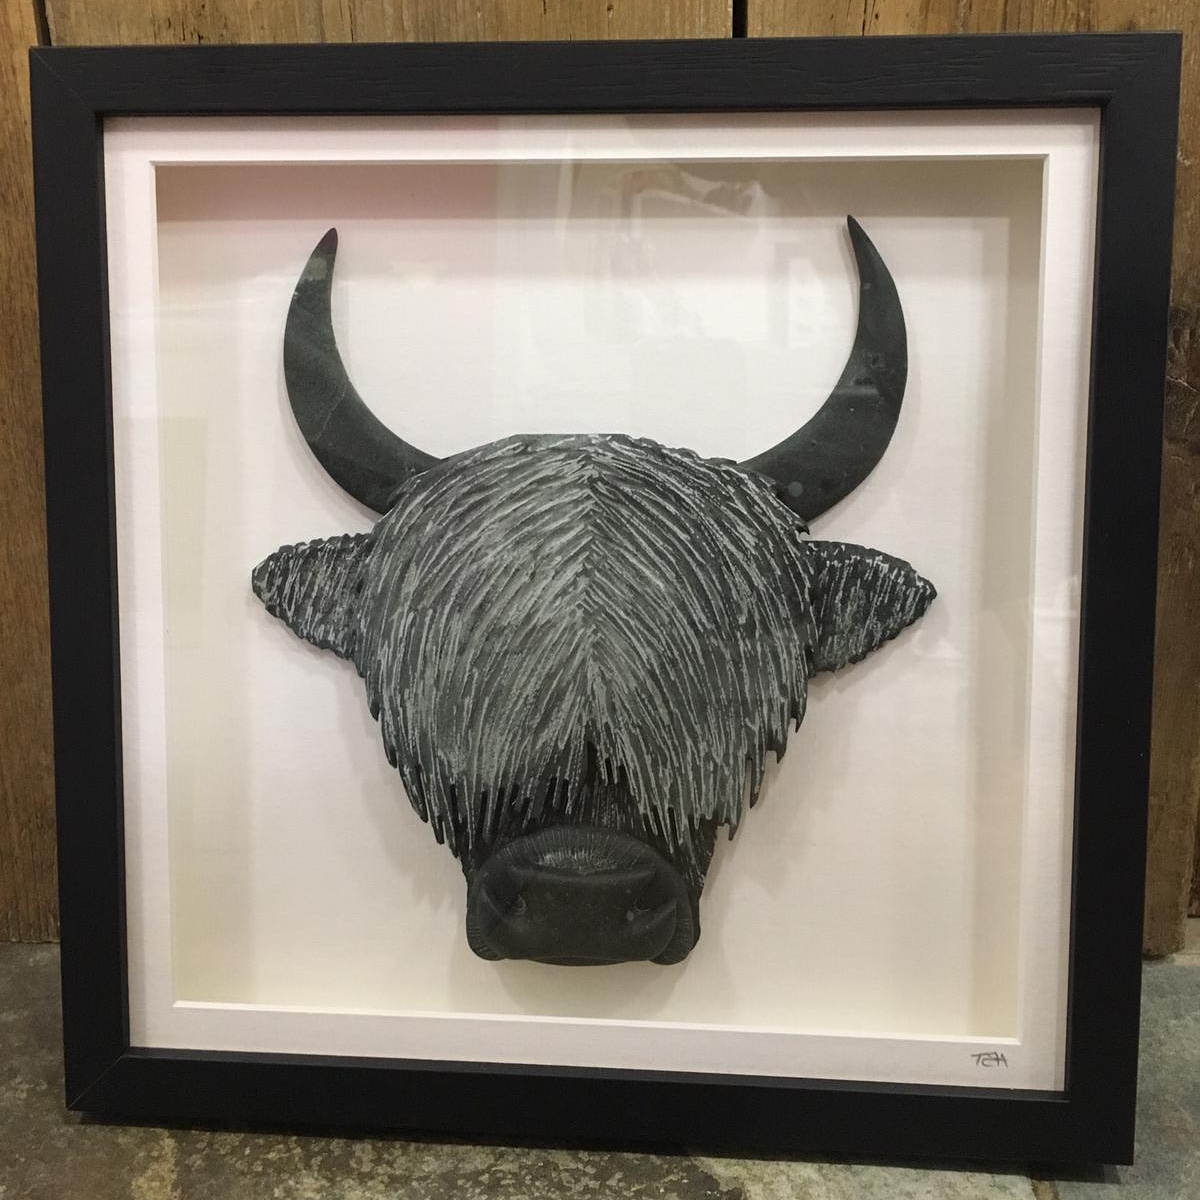 This highland cow is off to a new home today! The customers couldnt resist this high quality hand crafted item by @LovingSlate @LiveShopLocal @Honister @VisitKeswick @NotJustLakes #slateart #cumbrianslate #highlandcow #talentedartist #supportsmallbusinesses